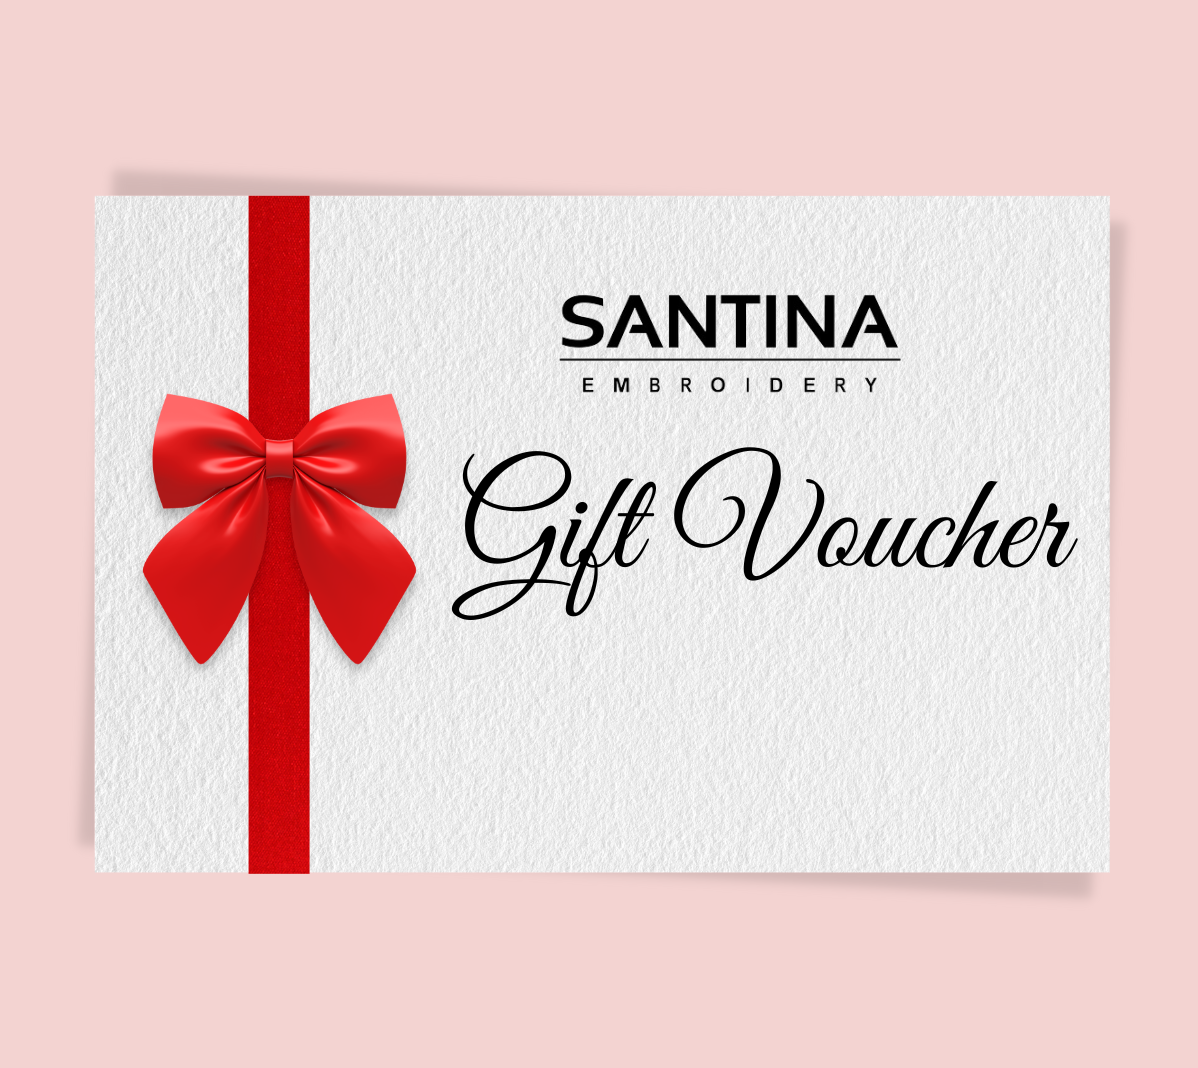 Santina Embroidery: Gift Card